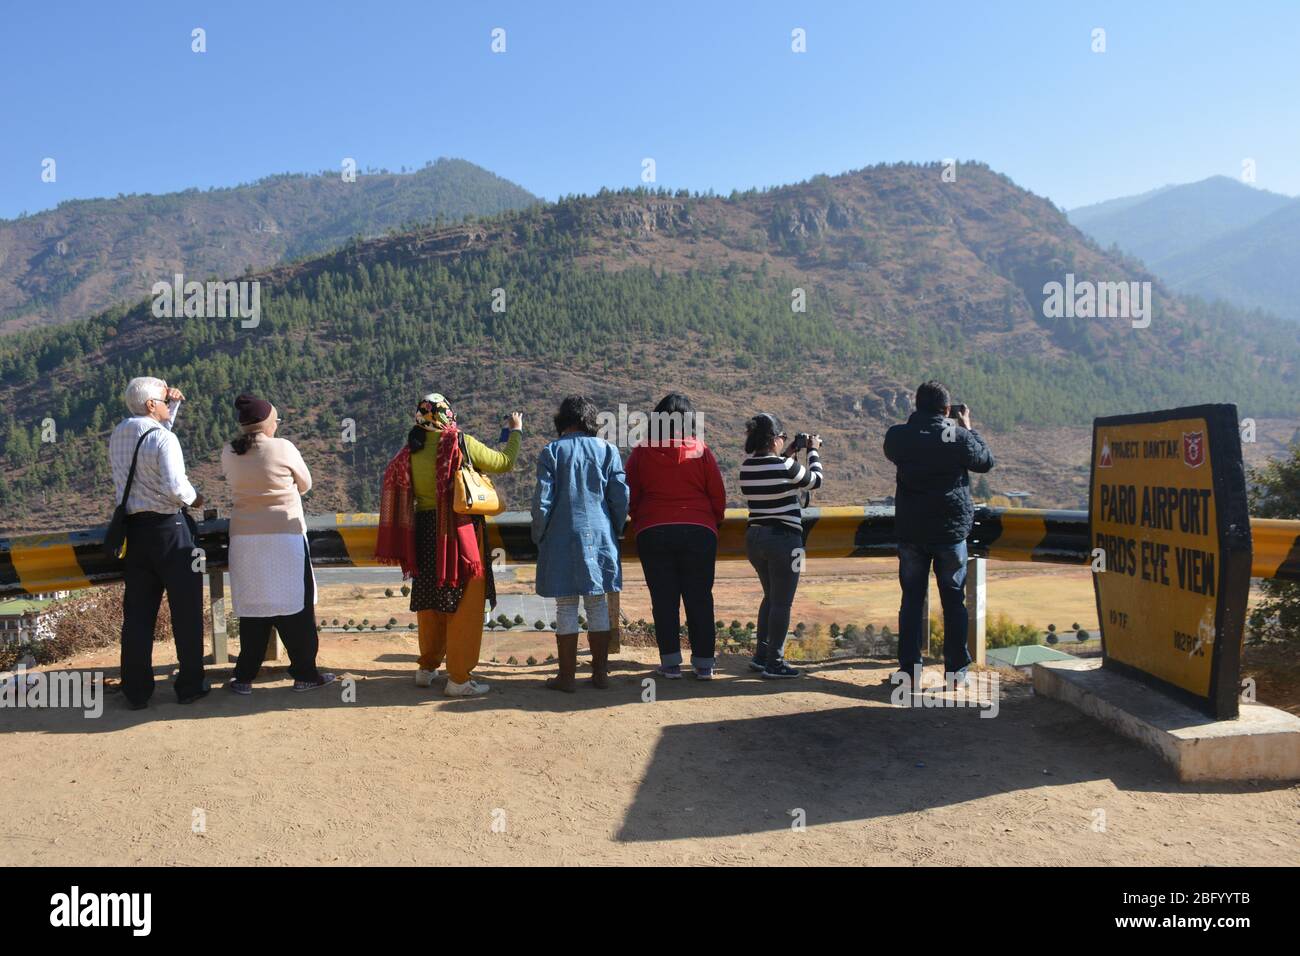 Aircraft taking off from Paro airport, Bhutan. Stock Photo